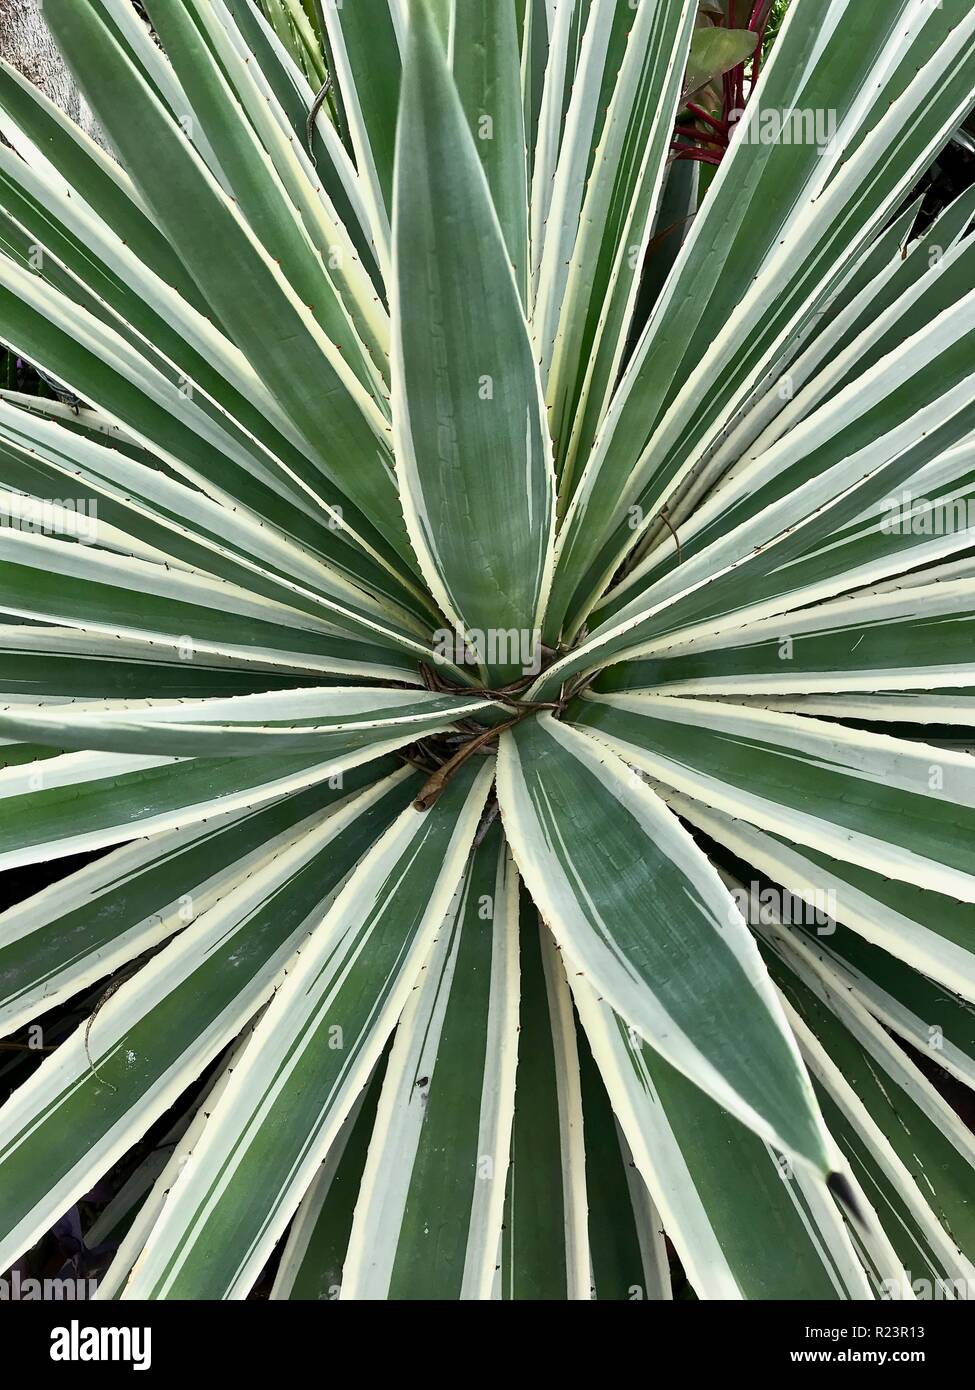 Looking down into a green and white yucca Stock Photo